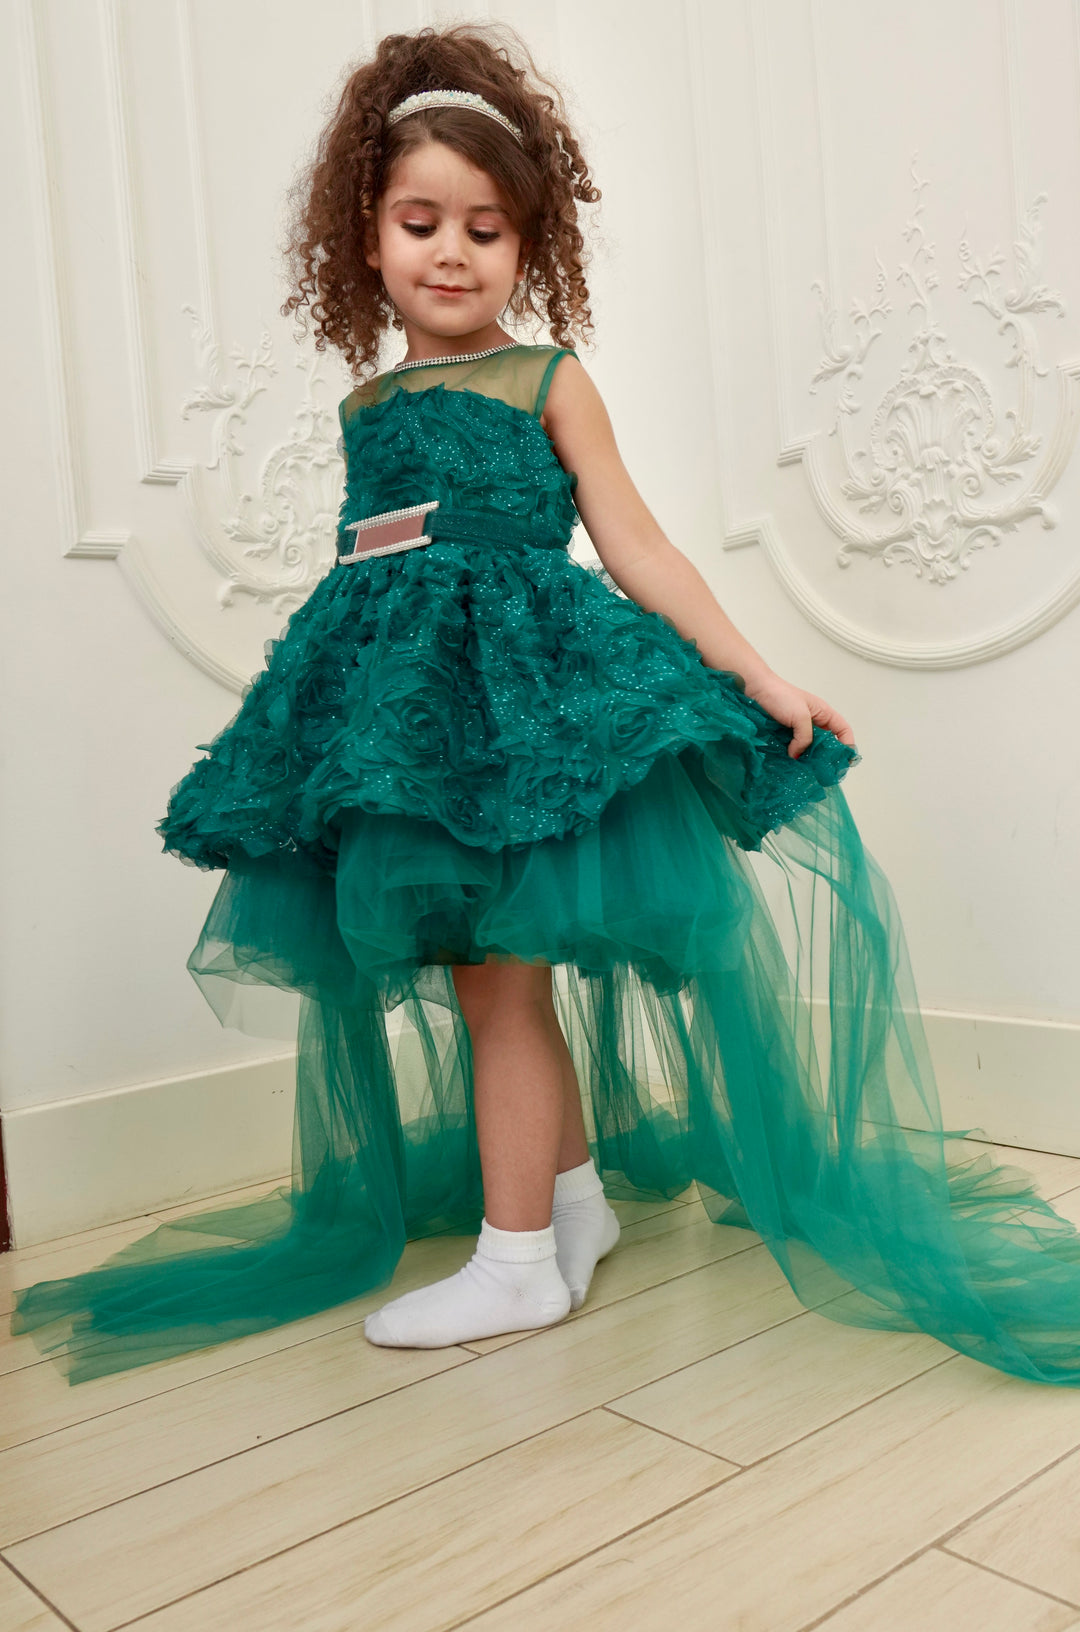 Seagreen Hilow Party Dress, Birthday party gowns for girls